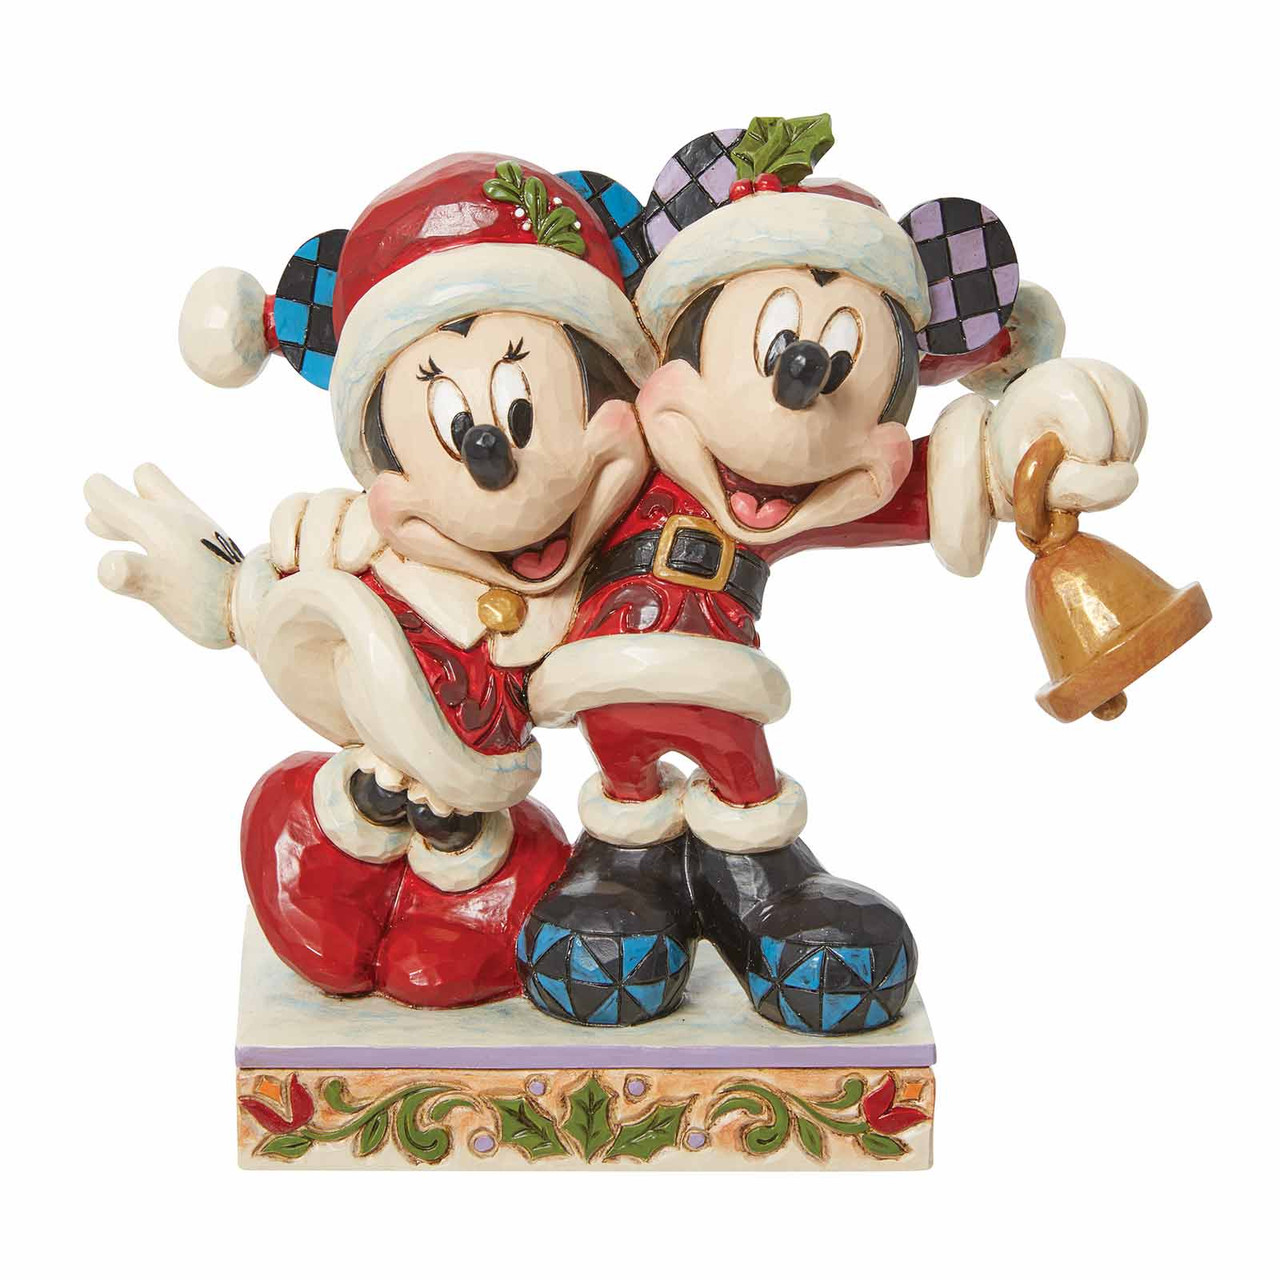 https://cdn11.bigcommerce.com/s-vmynke4q1q/images/stencil/1280x1280/products/4540/10391/6013058-Disney-Traditions-Mickey-and-Minnie-Santas-Figurine-by-Jim-Shore-Front__28299.1693866808.jpg?c=1